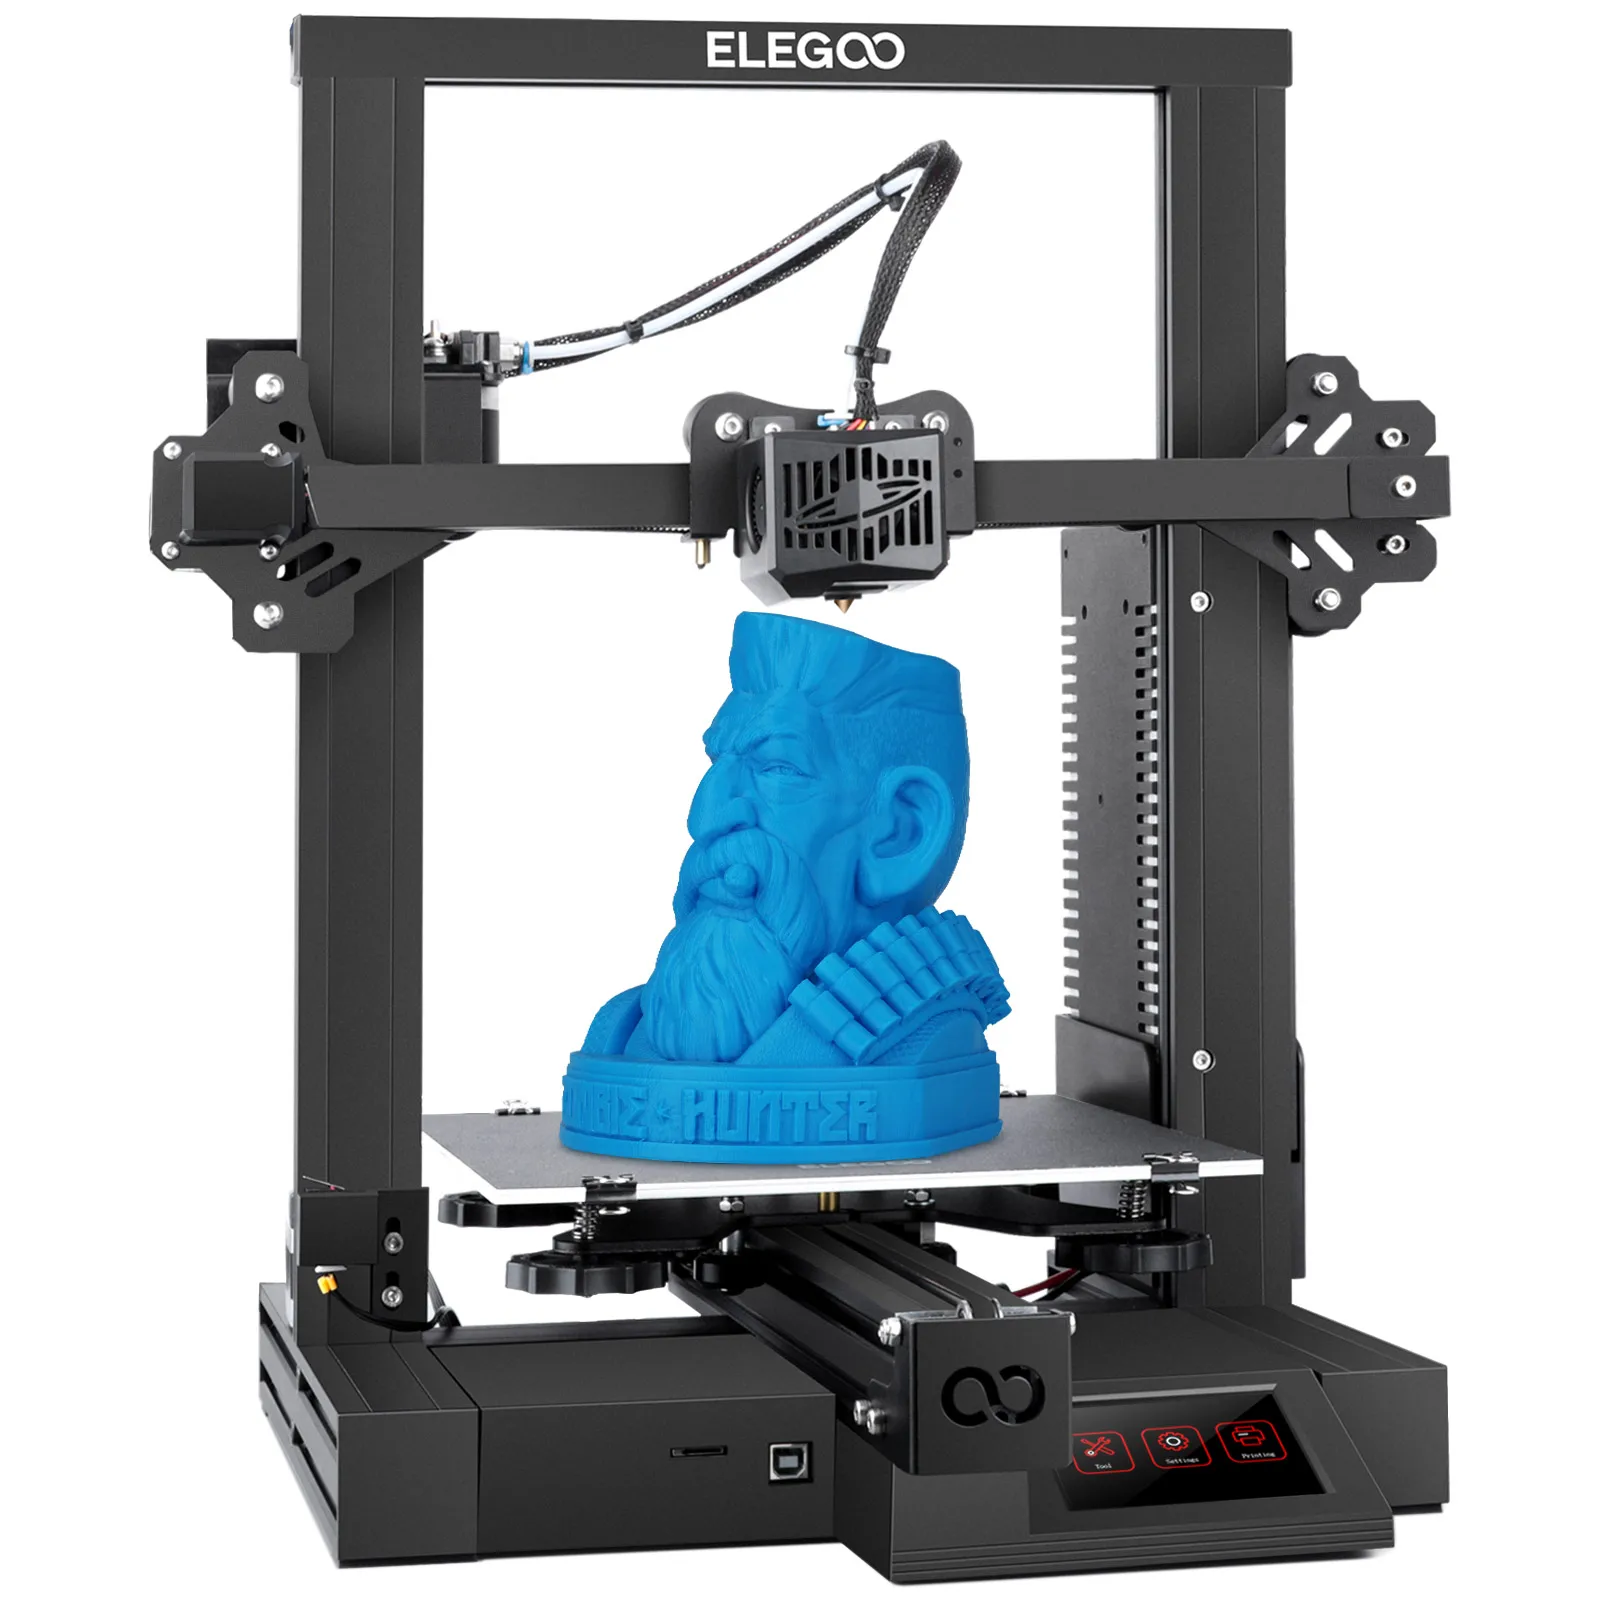 

ELEGOO NEPTUNE 2 FDM 3D Printer with Silient Motherboard Resume Printing and Removable Build Plate Impresora 3D 220x220x250mm